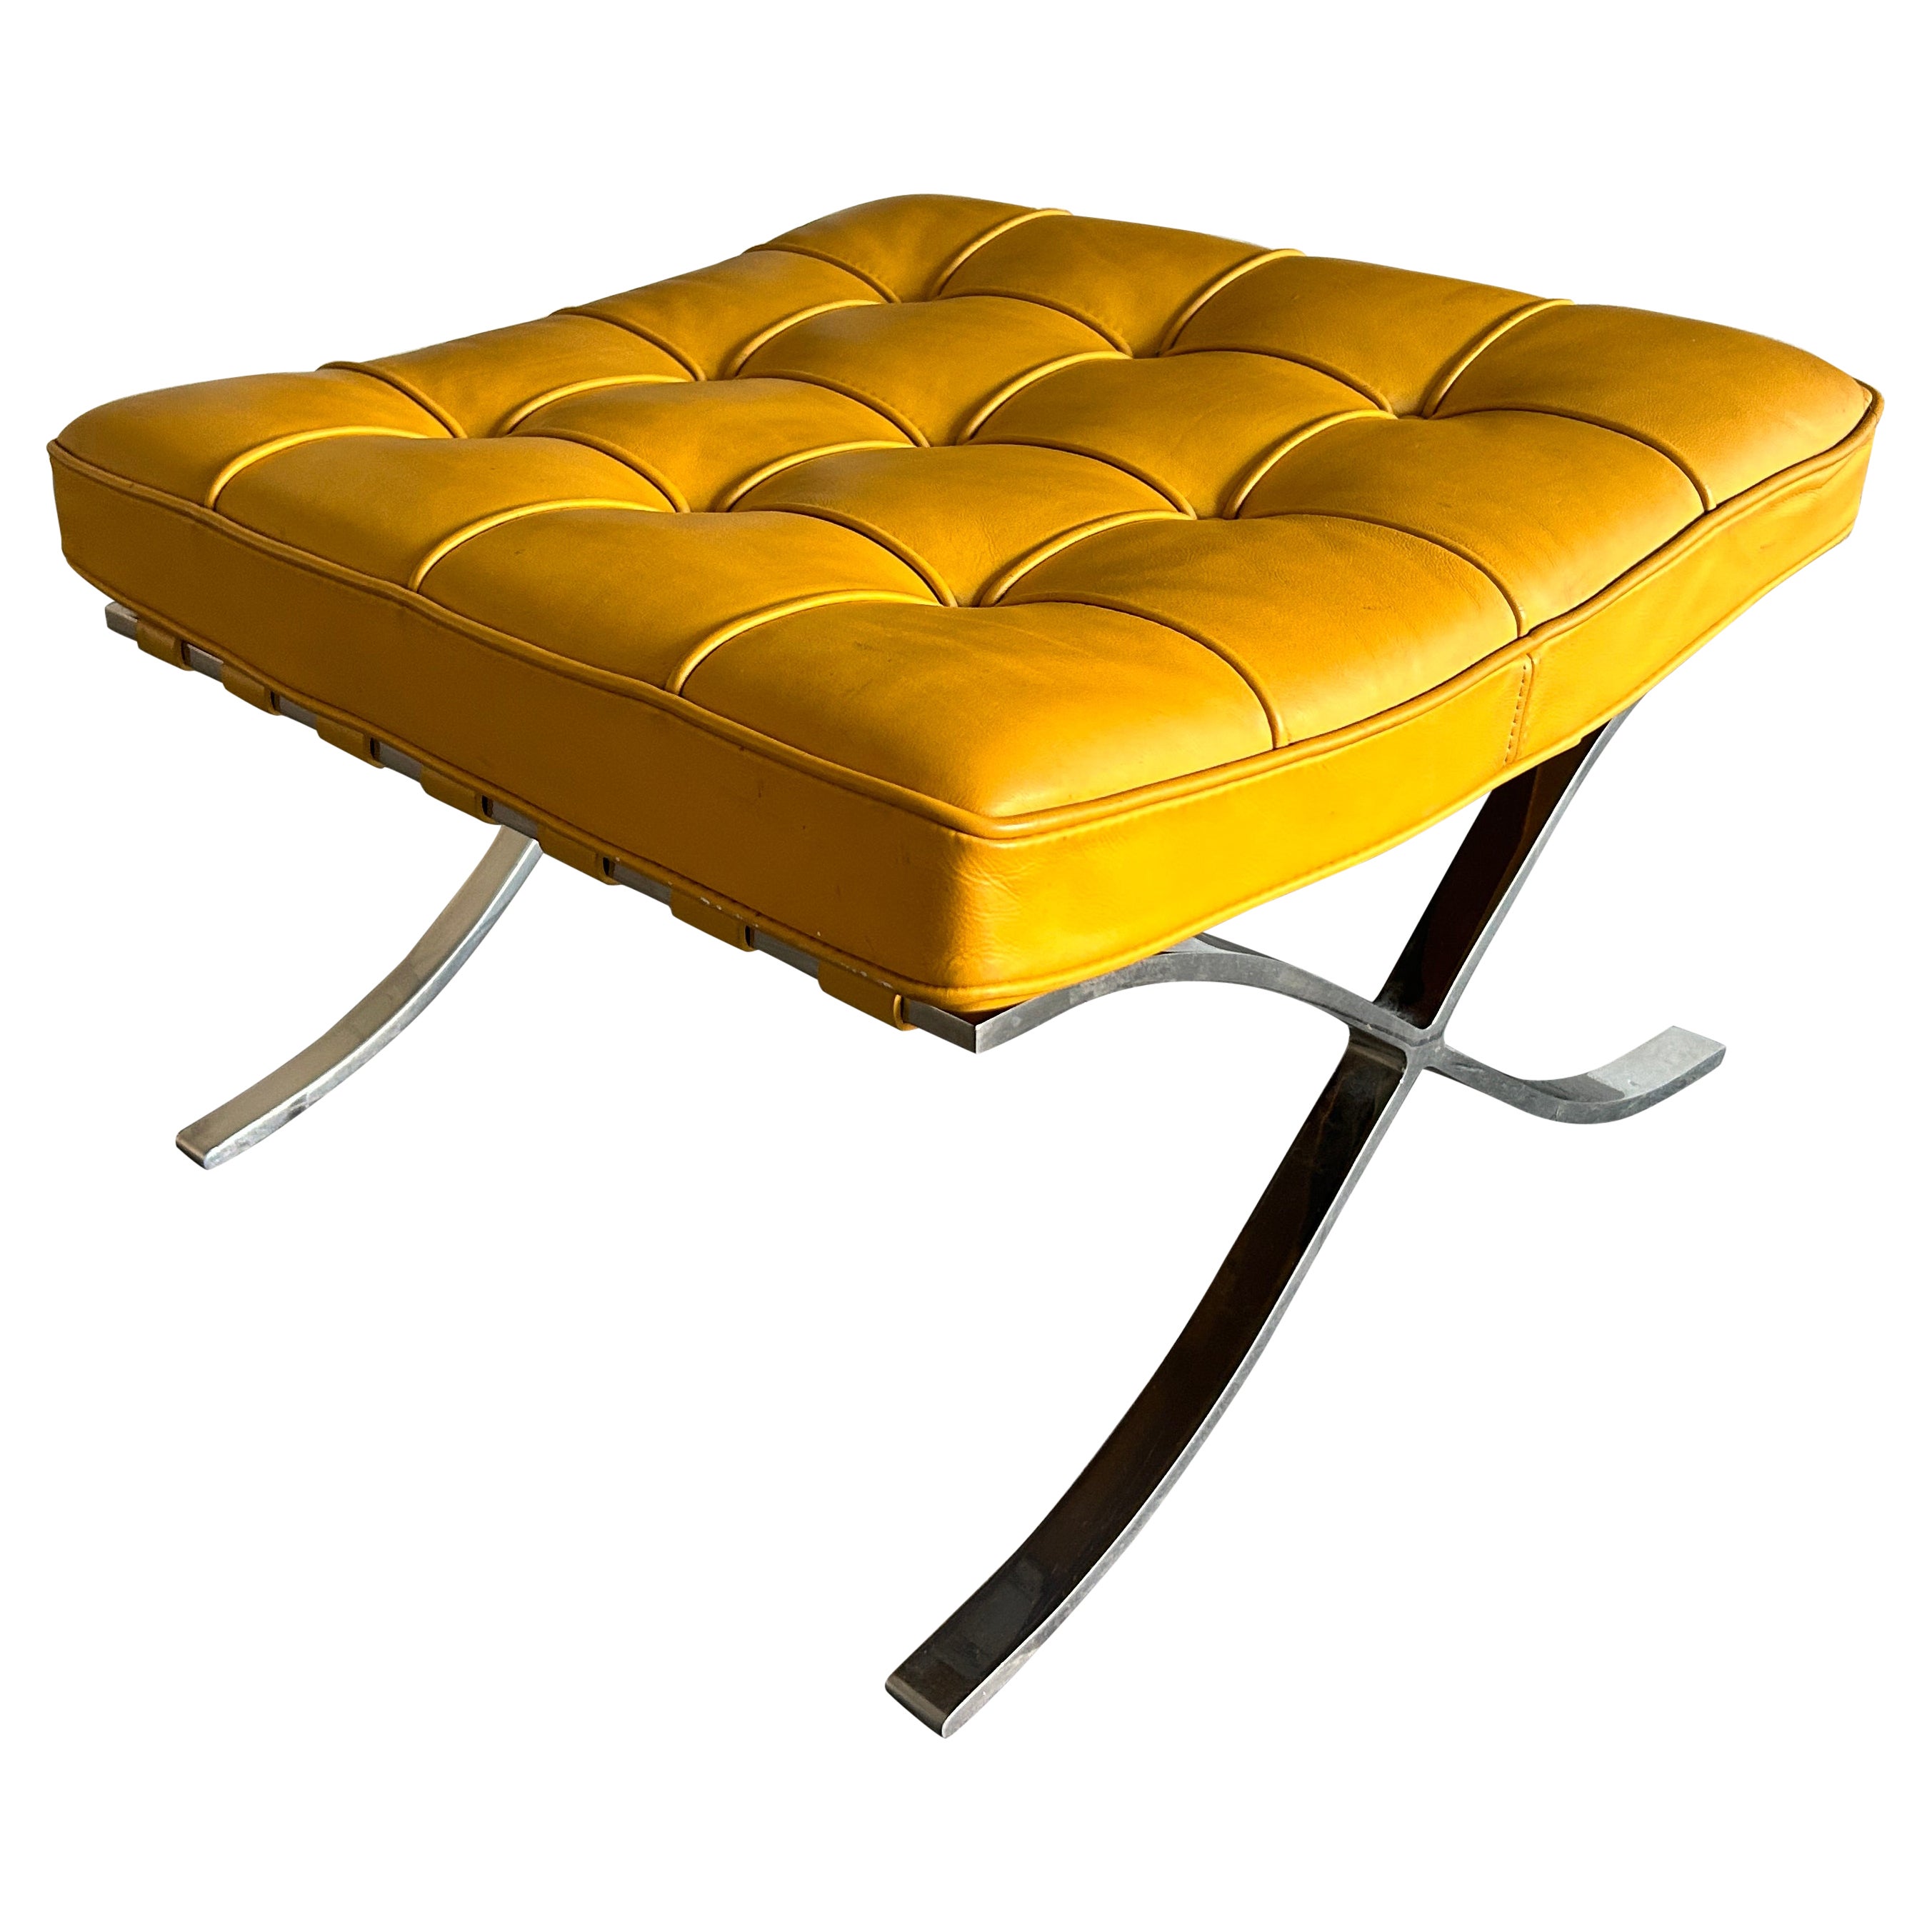 Midcentury Barcelona Ottoman Stool in bright yellow Leather for Knoll For Sale